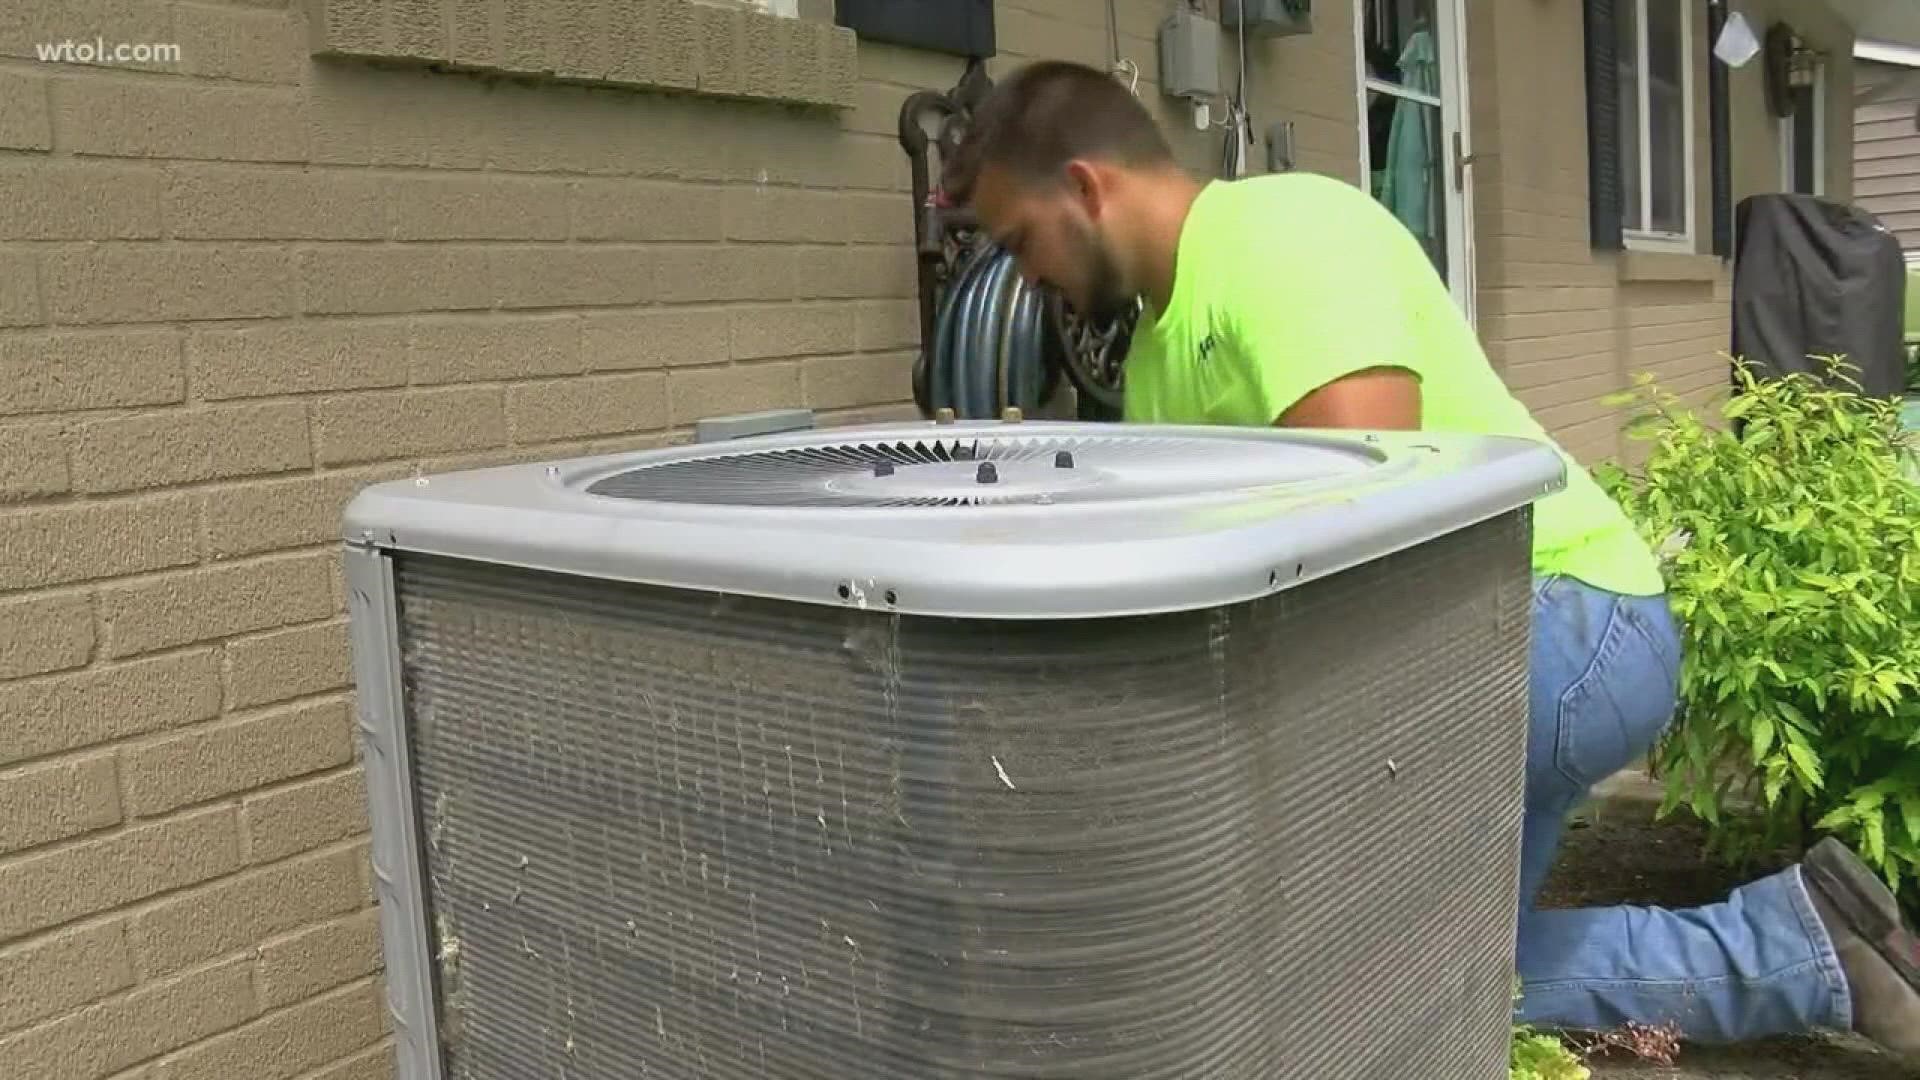 If the landlord owns the air conditioning unit that once worked in the home, legal experts say they could be responsible for maintenance.